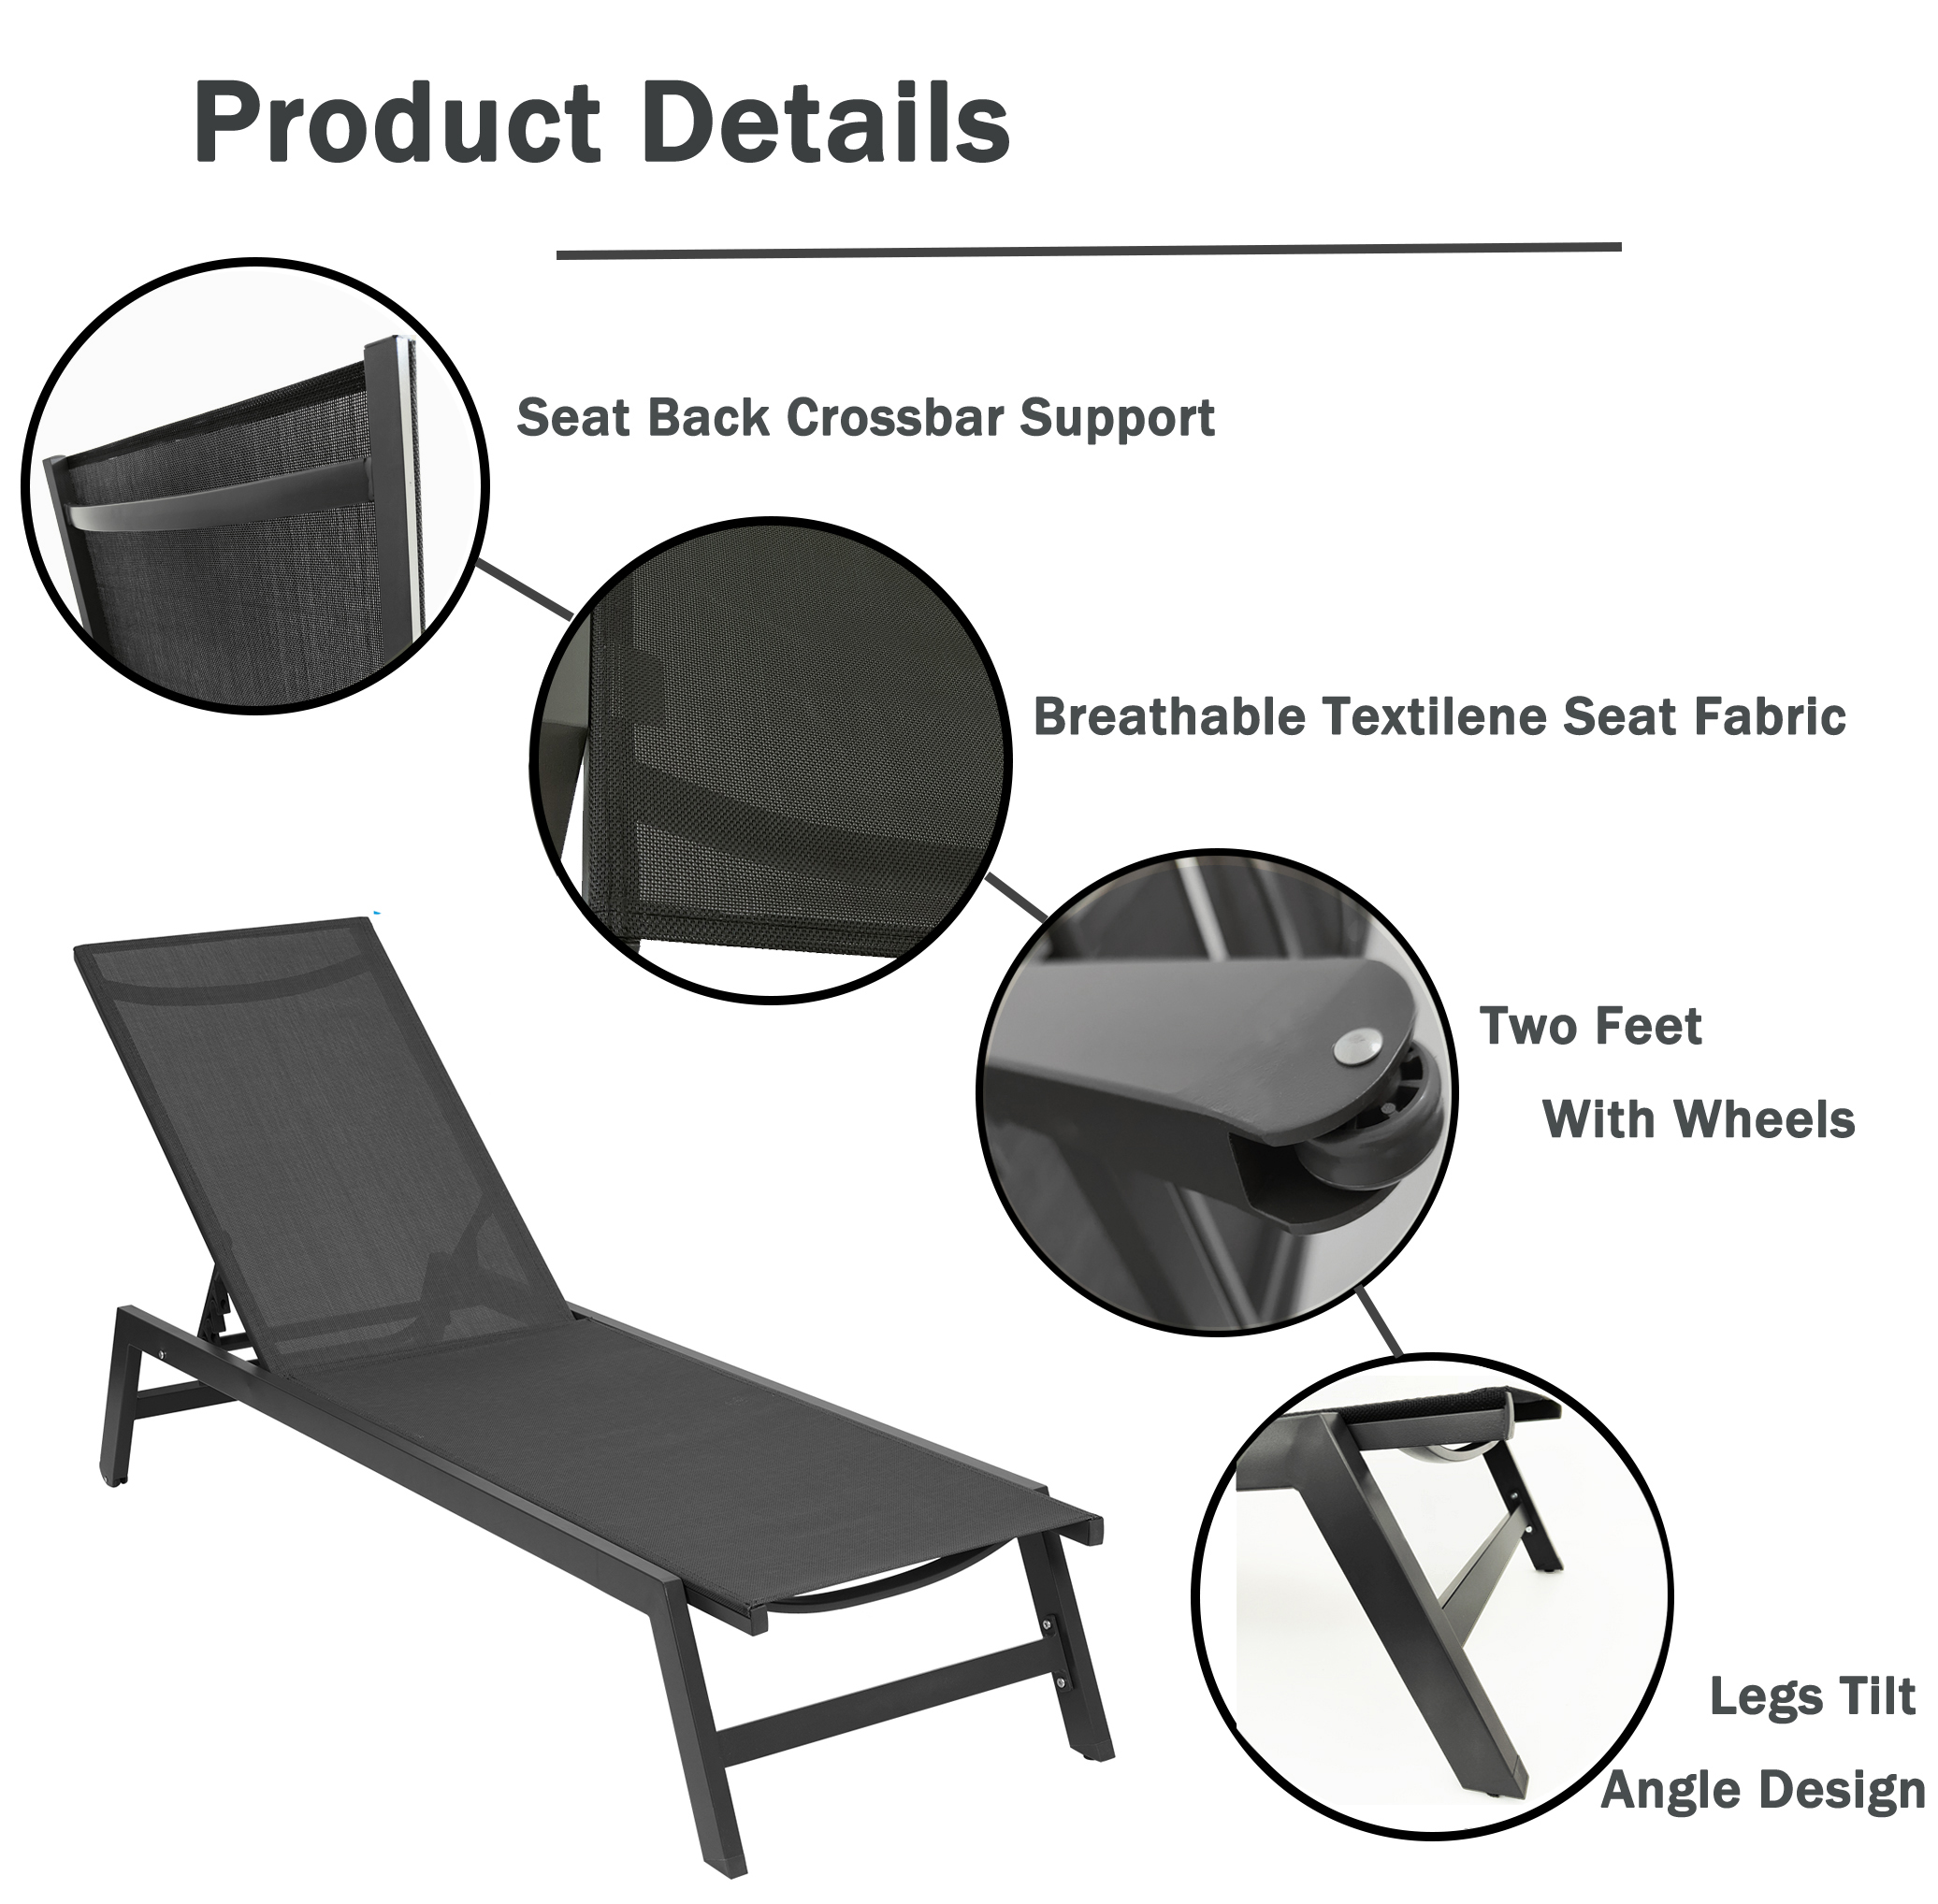 Seizeen Outdoor Chaise Lounge Chair, Five-Position Adjustable Patio Lounge Chair for Poolside Deck Porch Backyard, Black Aluminum Frame Furniture Set with Wheels - image 3 of 11